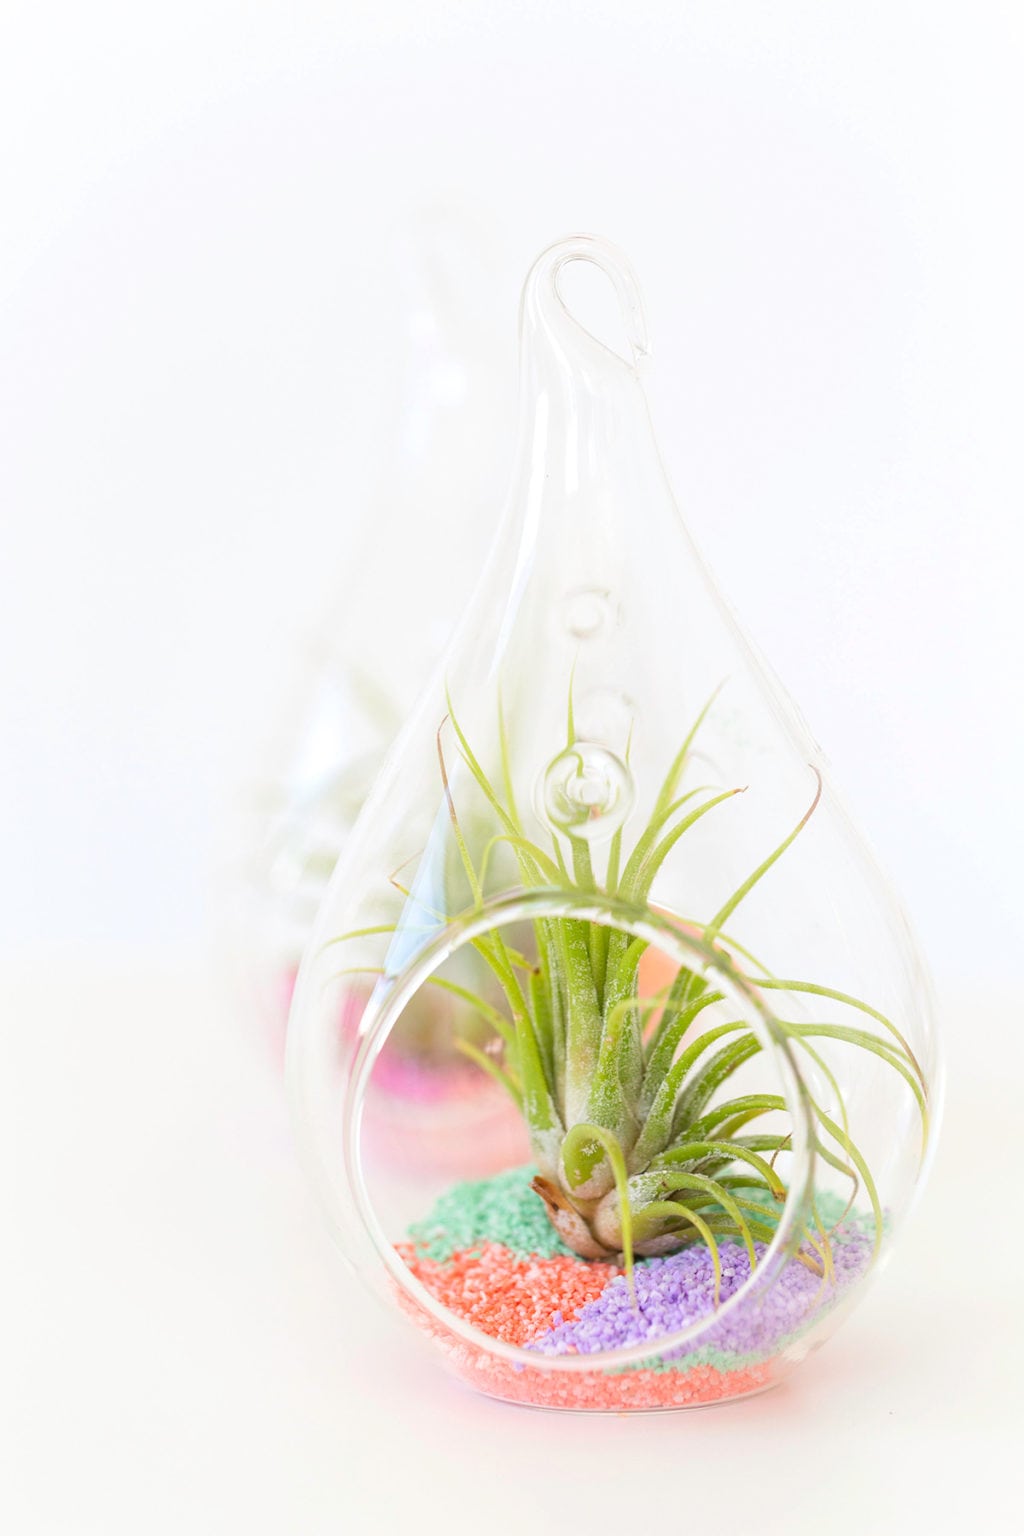 remember when you made colored sand as a kid? well, I'm giving it an adult makeover with these @methodhome and their #fearnomess campaign to make DIY Colored Sand Air Plants 